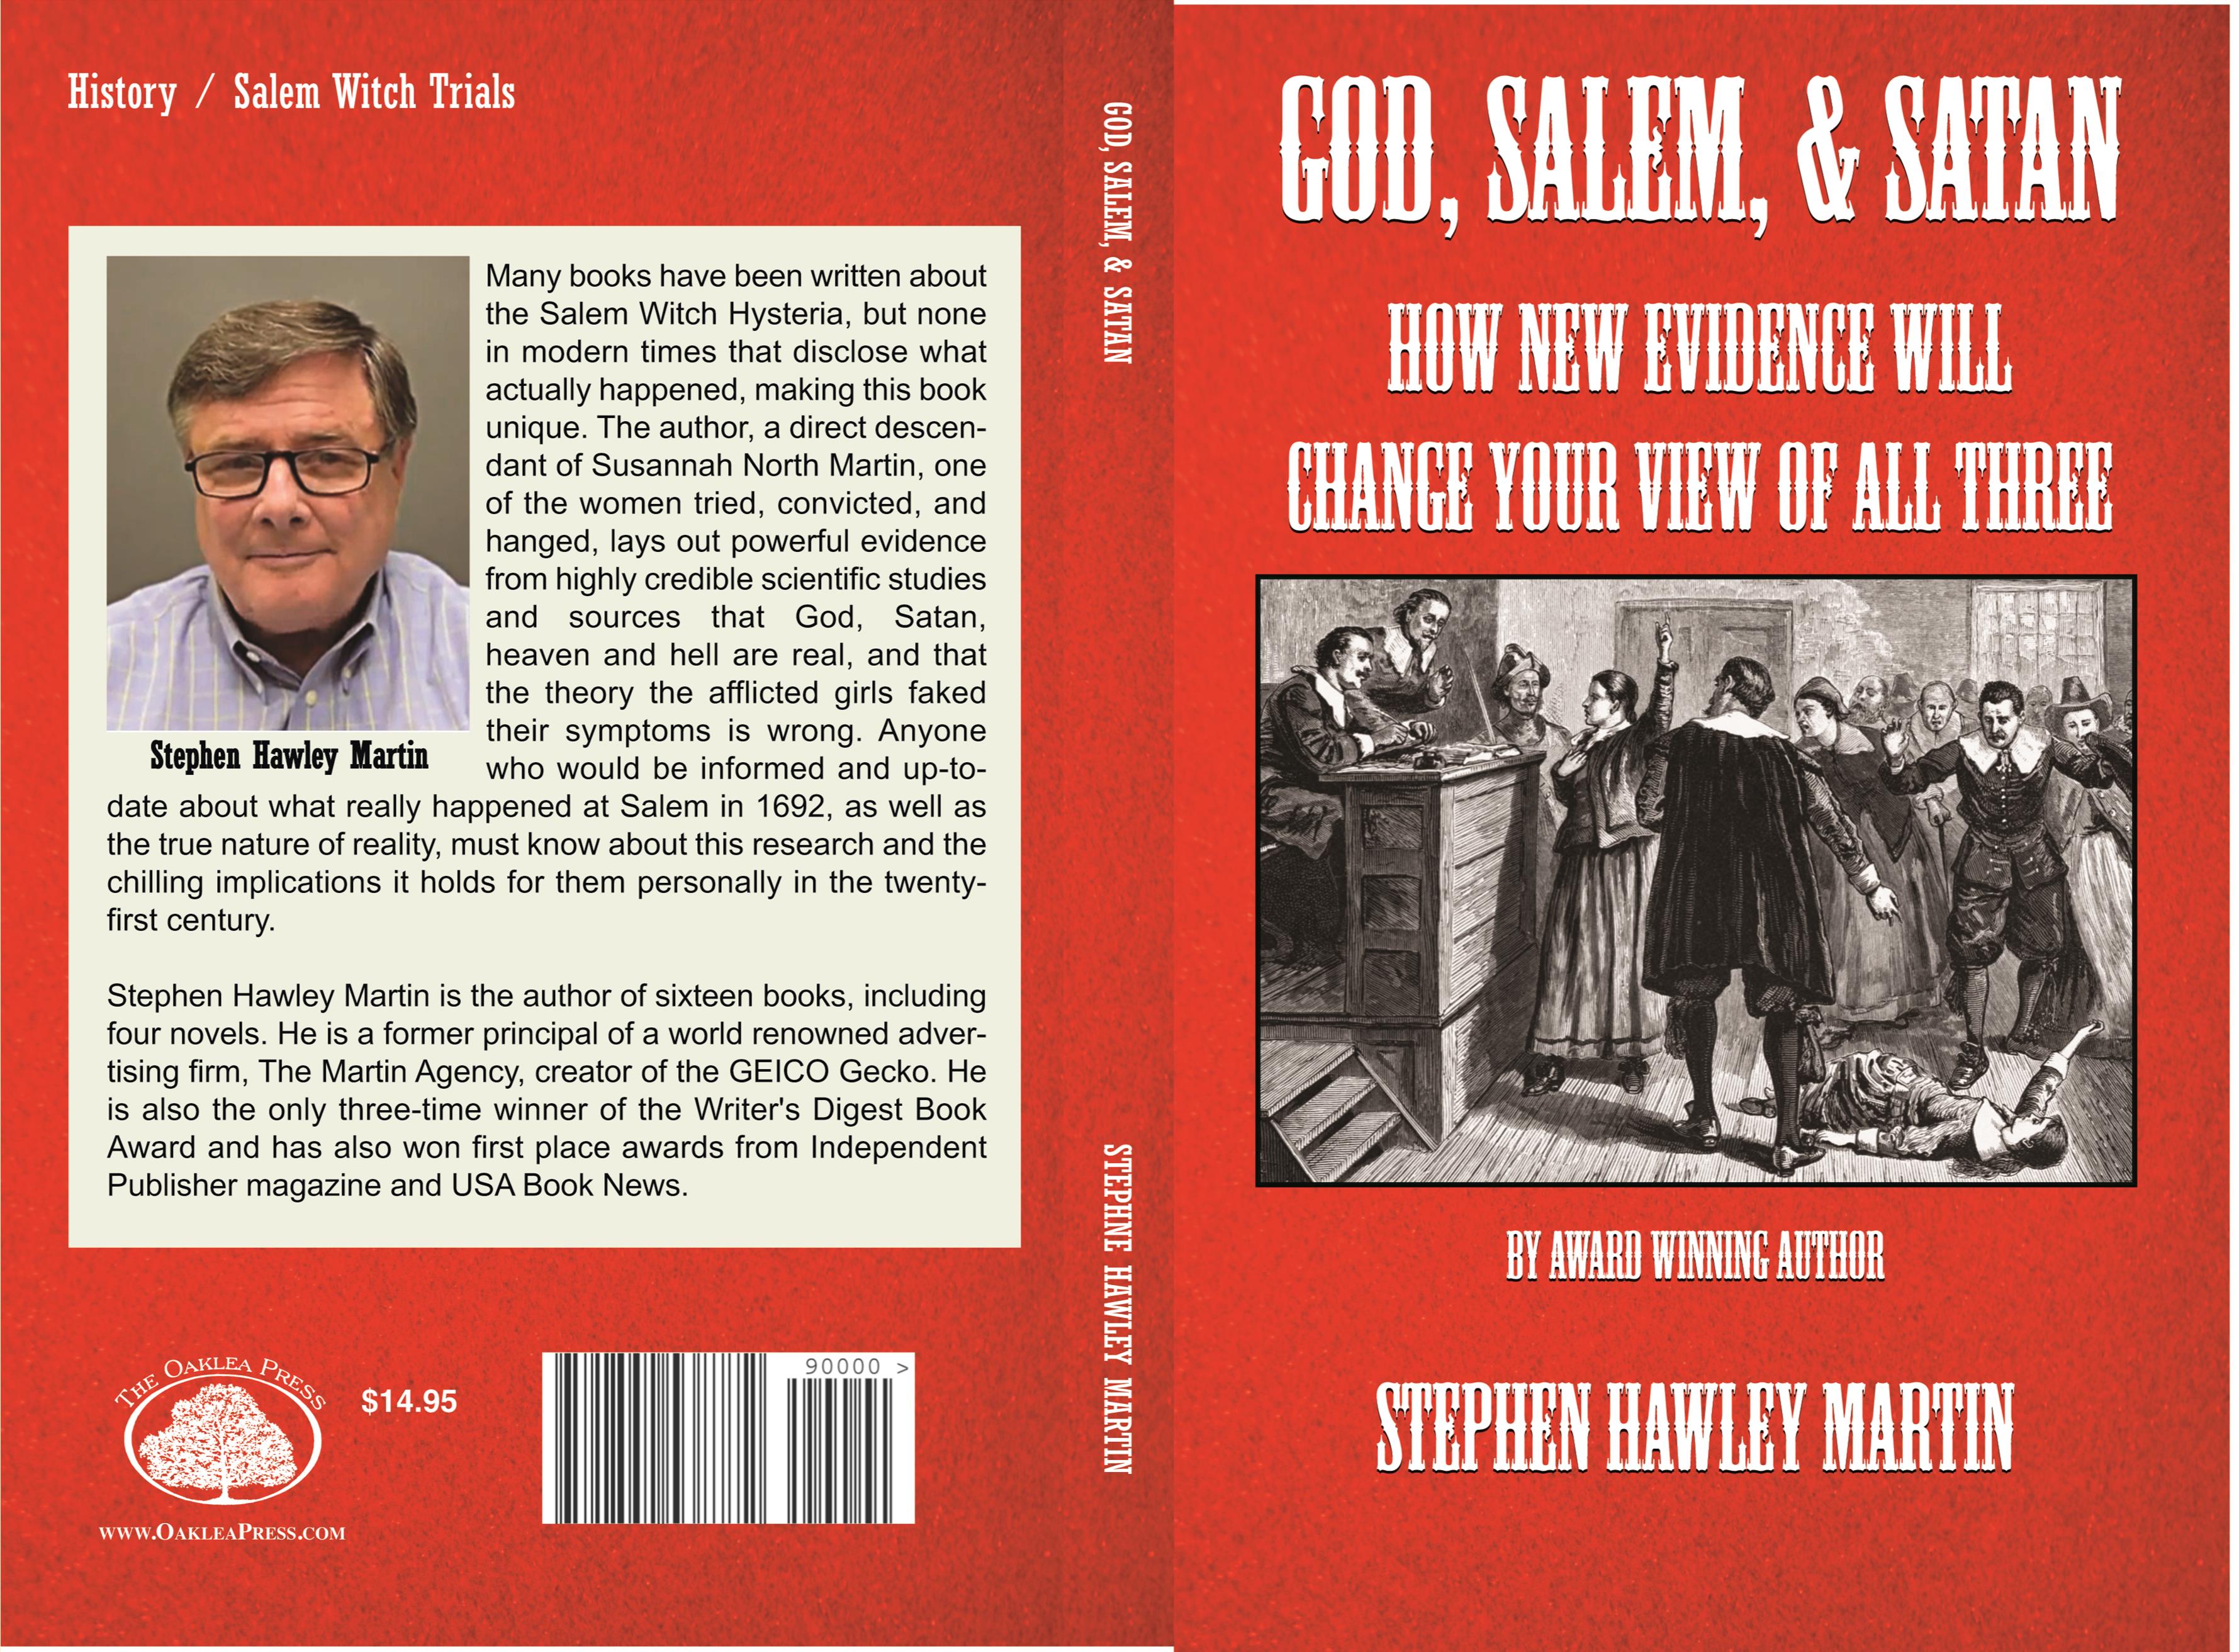 GOD, SALEM, & SATAN: How New Evidence Will Change Your View of All Three cover image